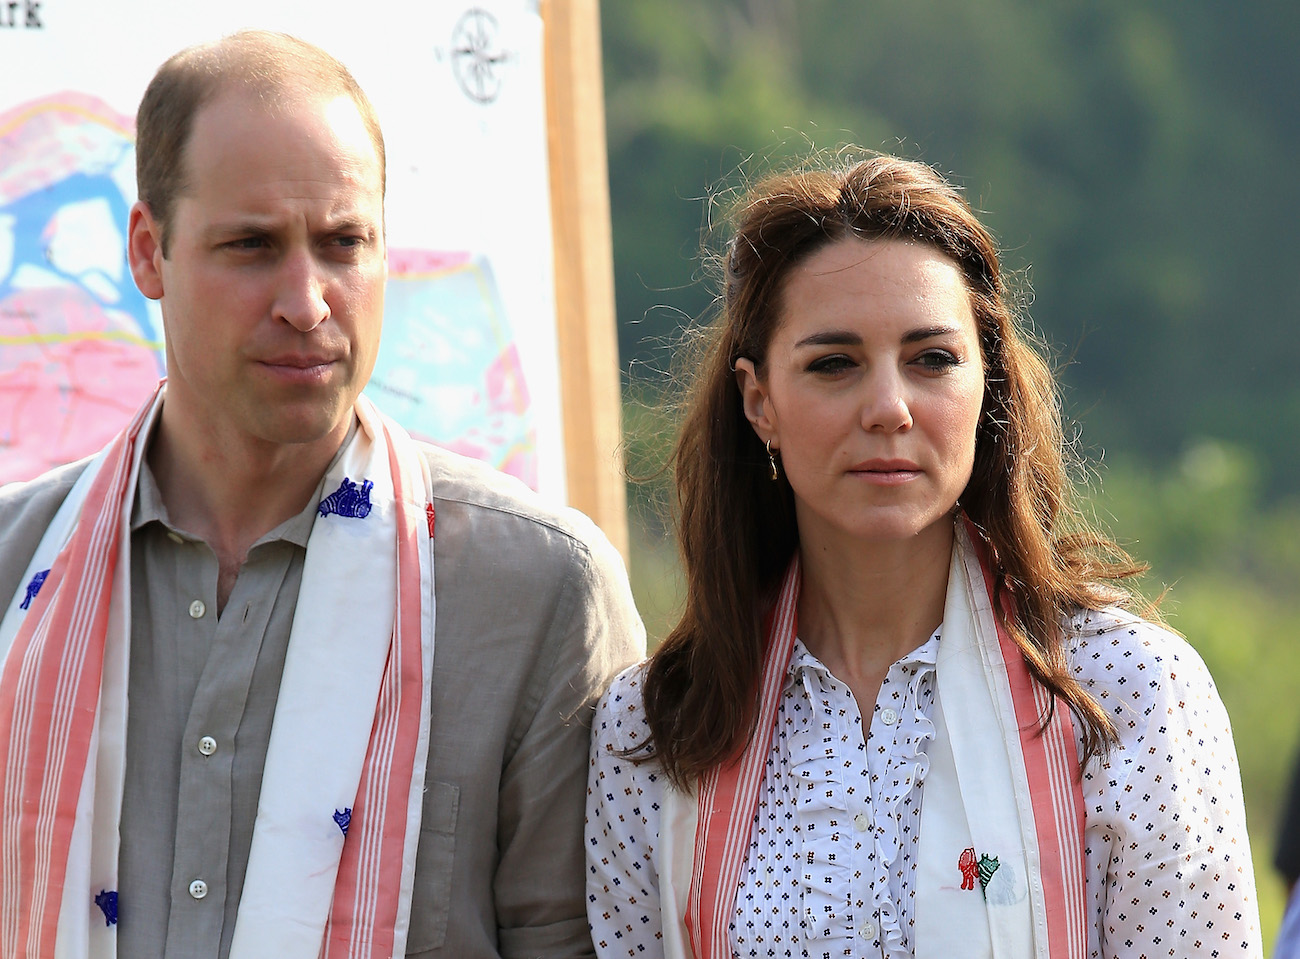 Prince William and Kate Middleton looking on at something off-camera, both wearing red-and-white scarves